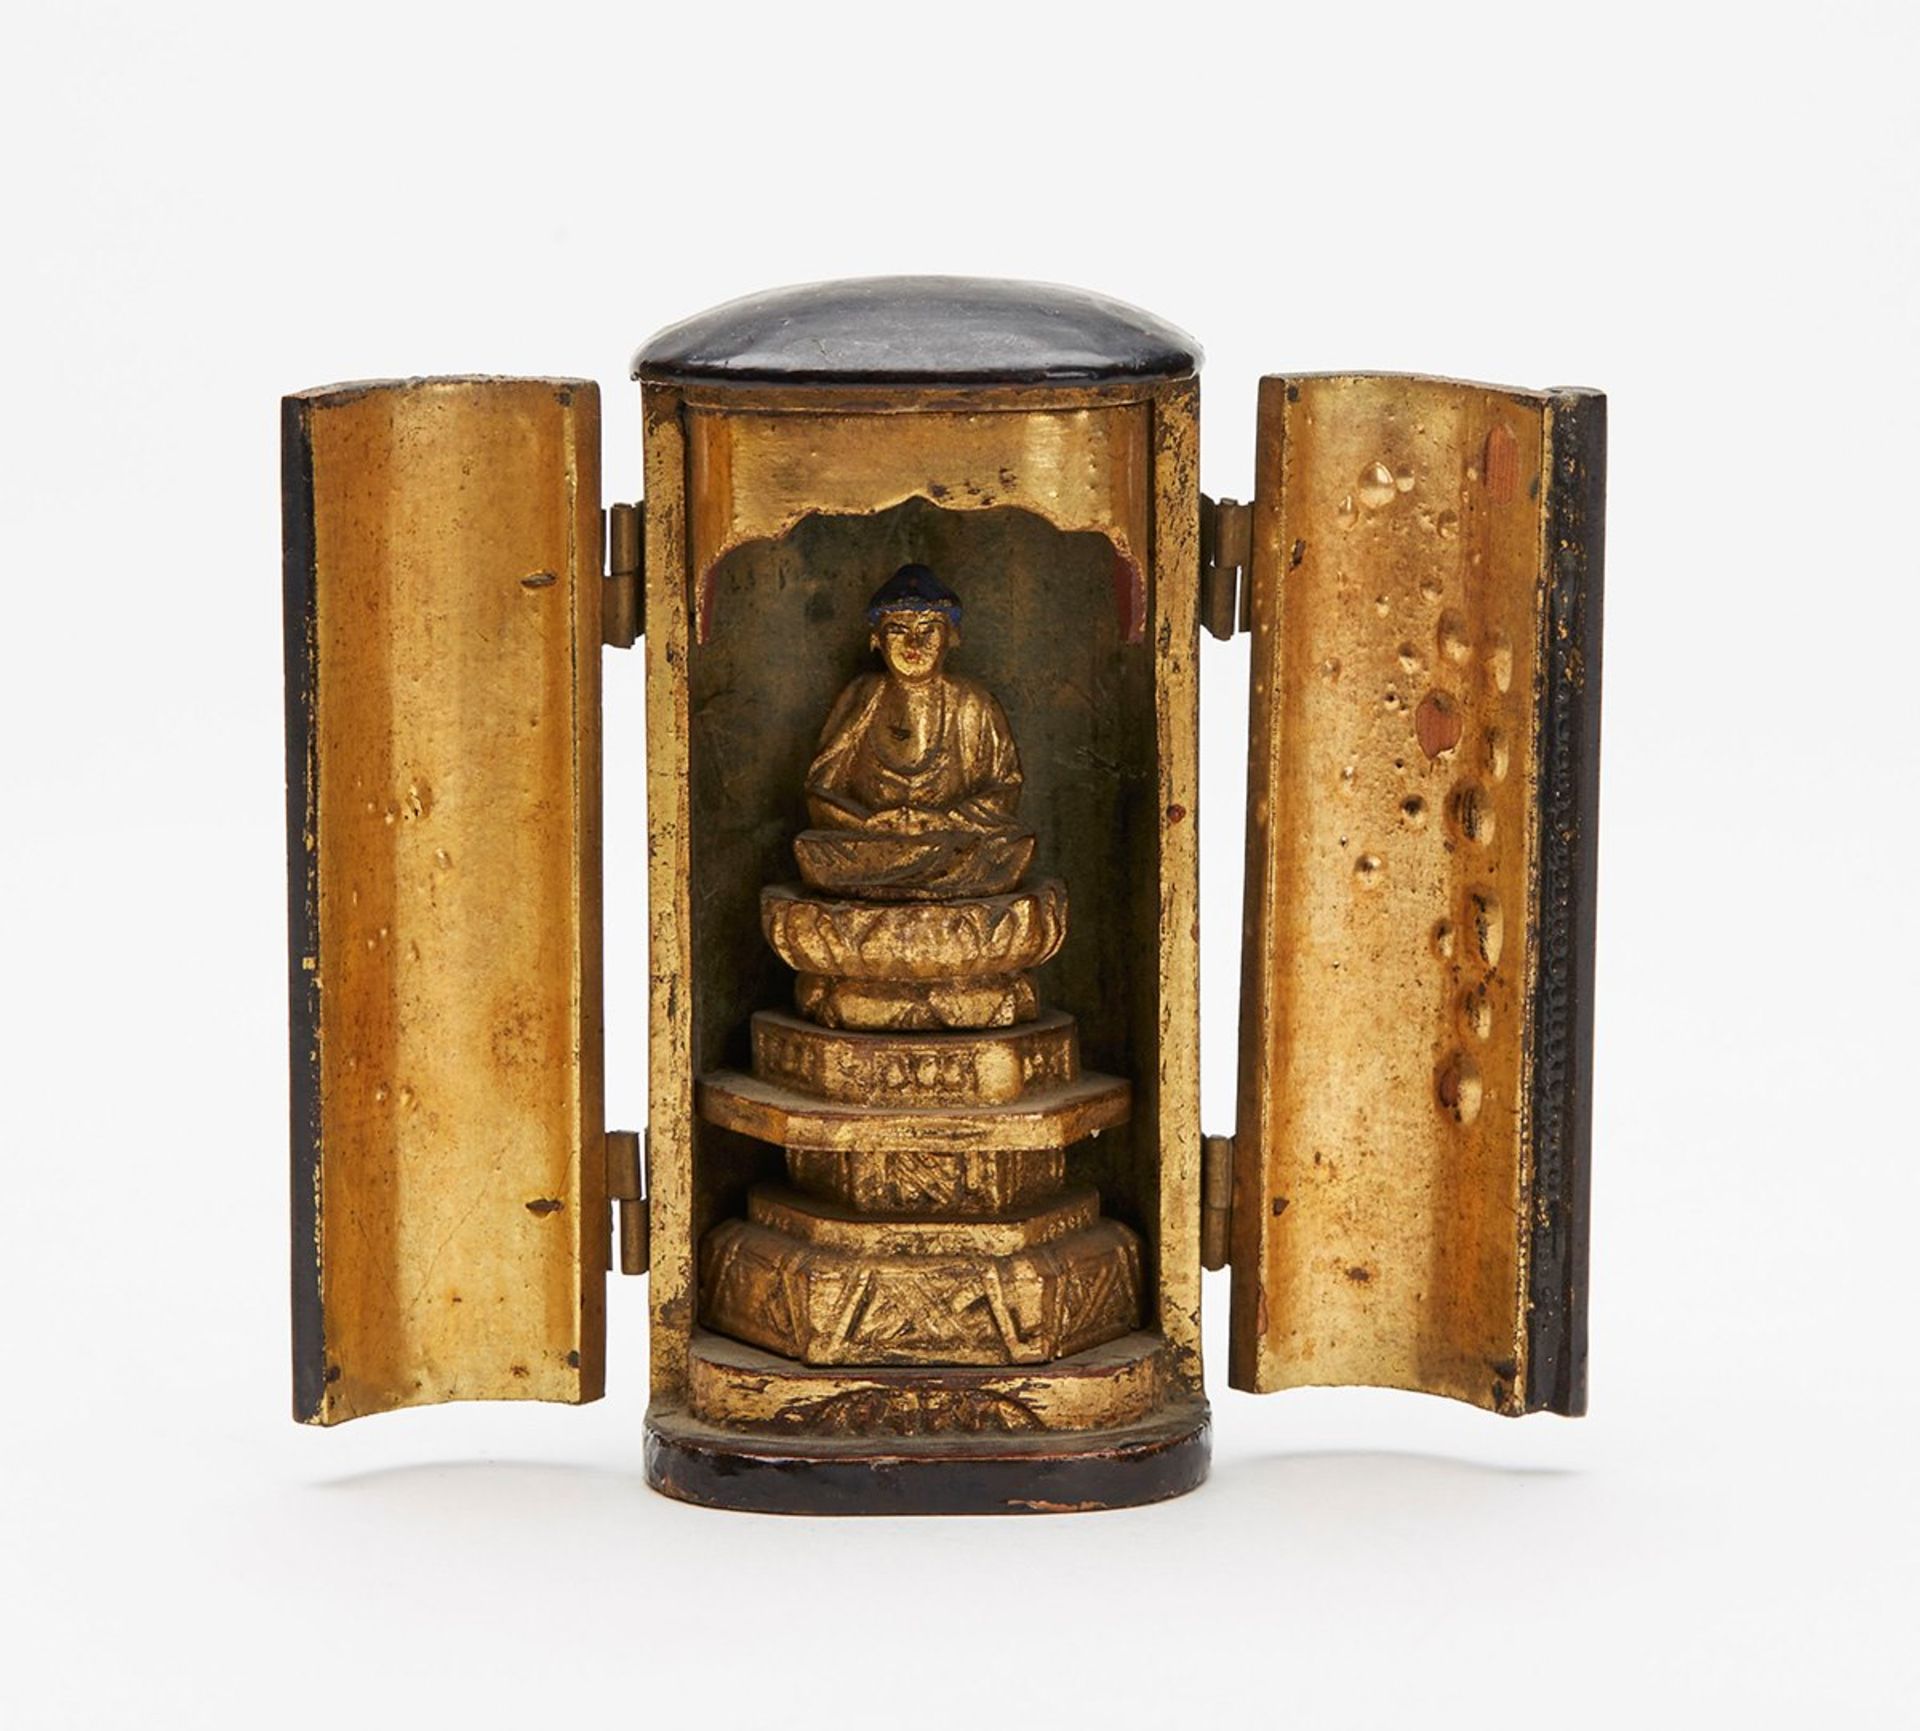 Antique Japanese Zushi With Carved Buddha Figure 19Th C.